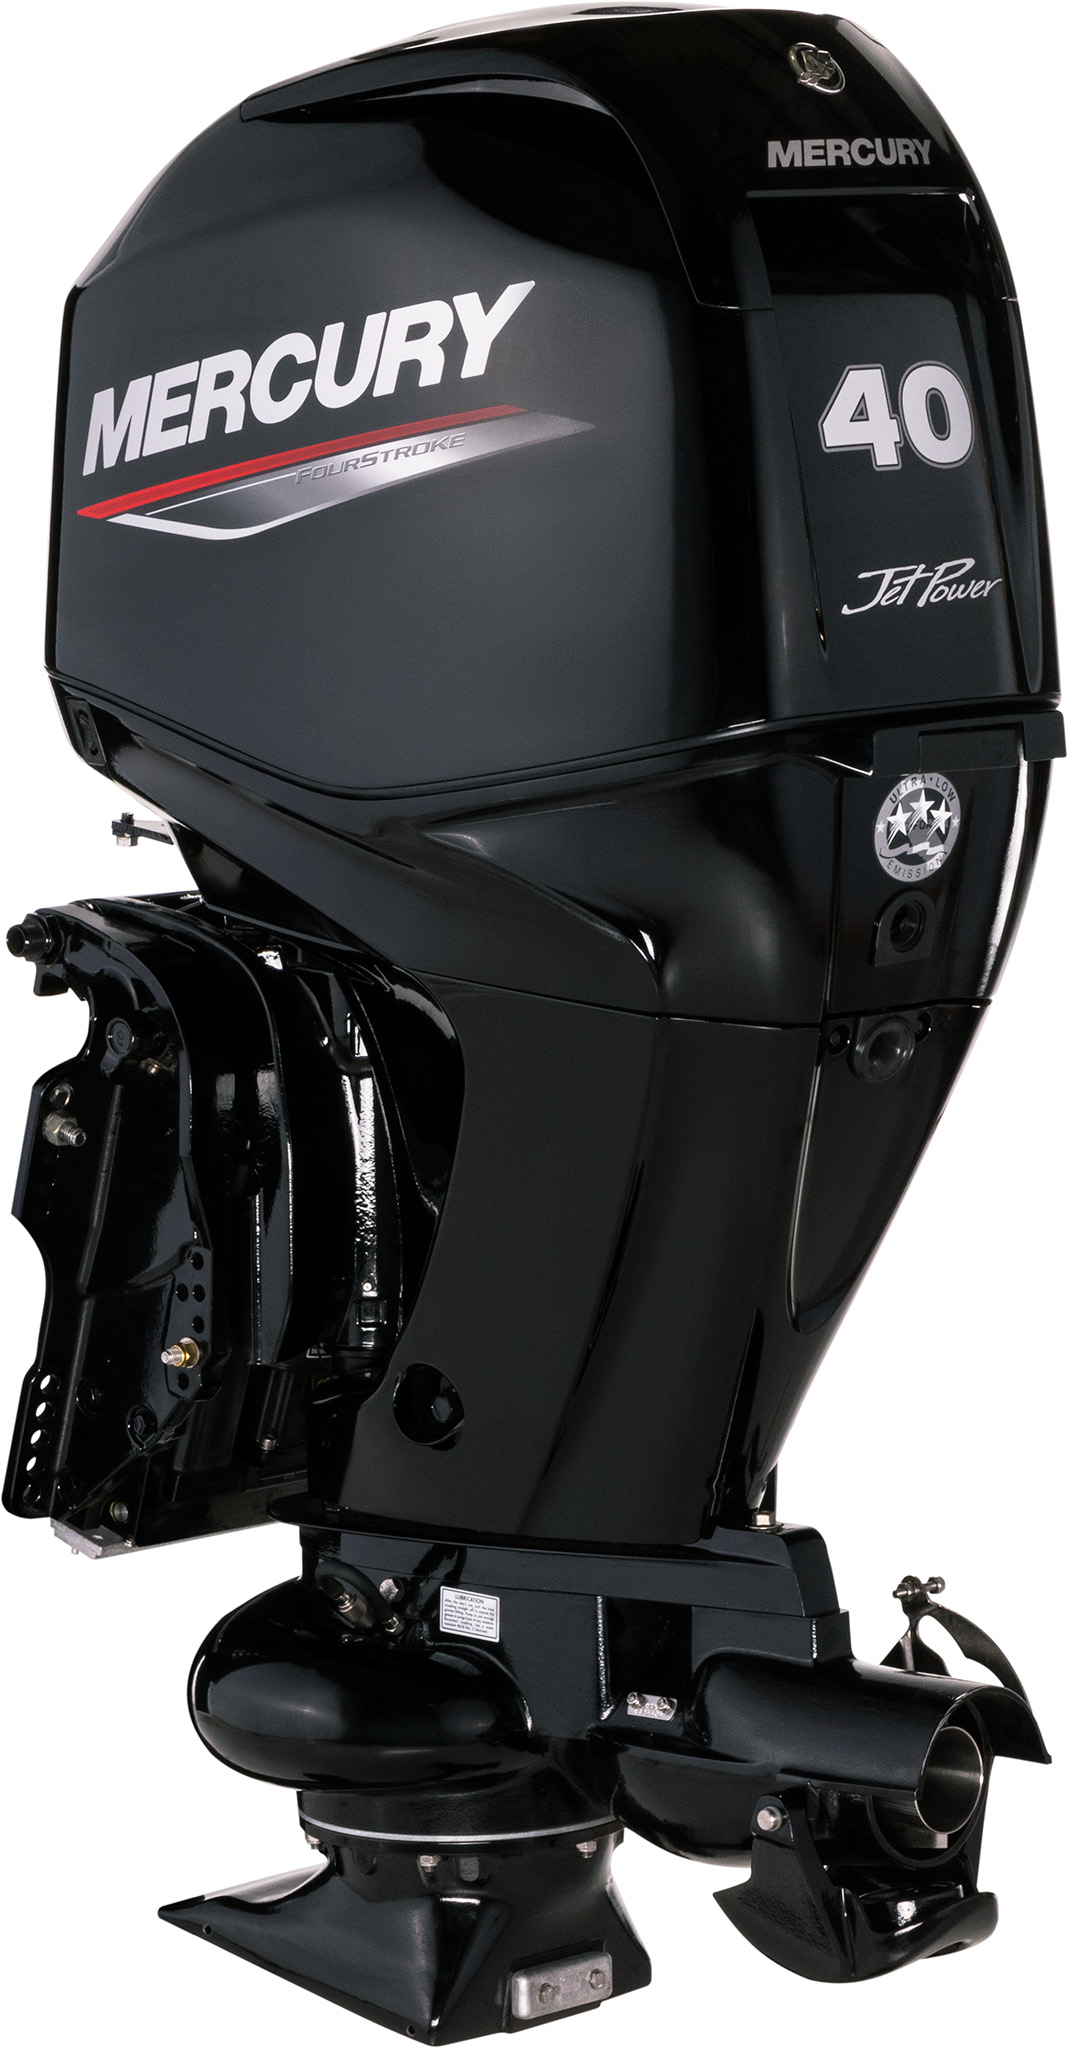 65hp Jet Outboard for Sale in Wesley, IA Loebig LLC